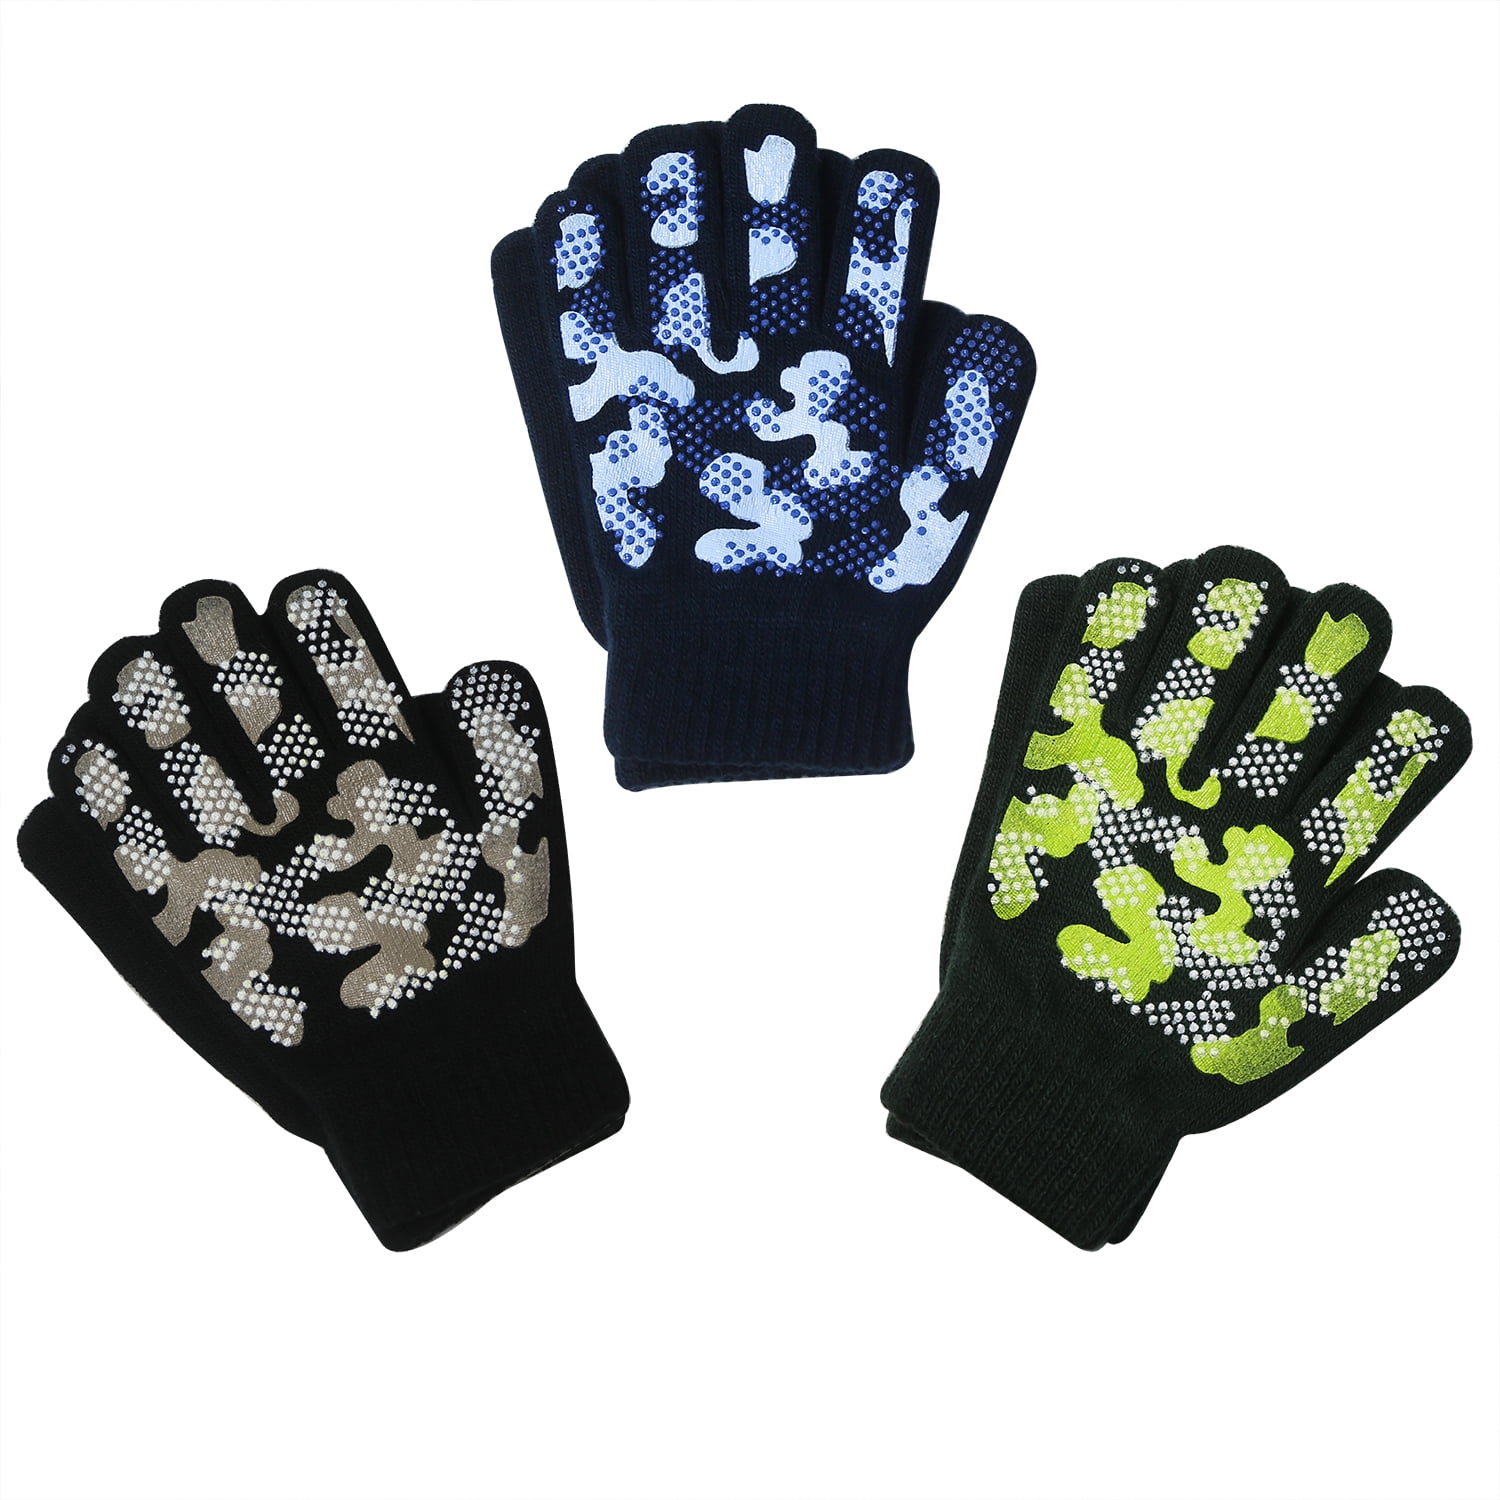 1 Pair Adults Magic Stretch Gripper Winter Outdoor Thermal Gloves